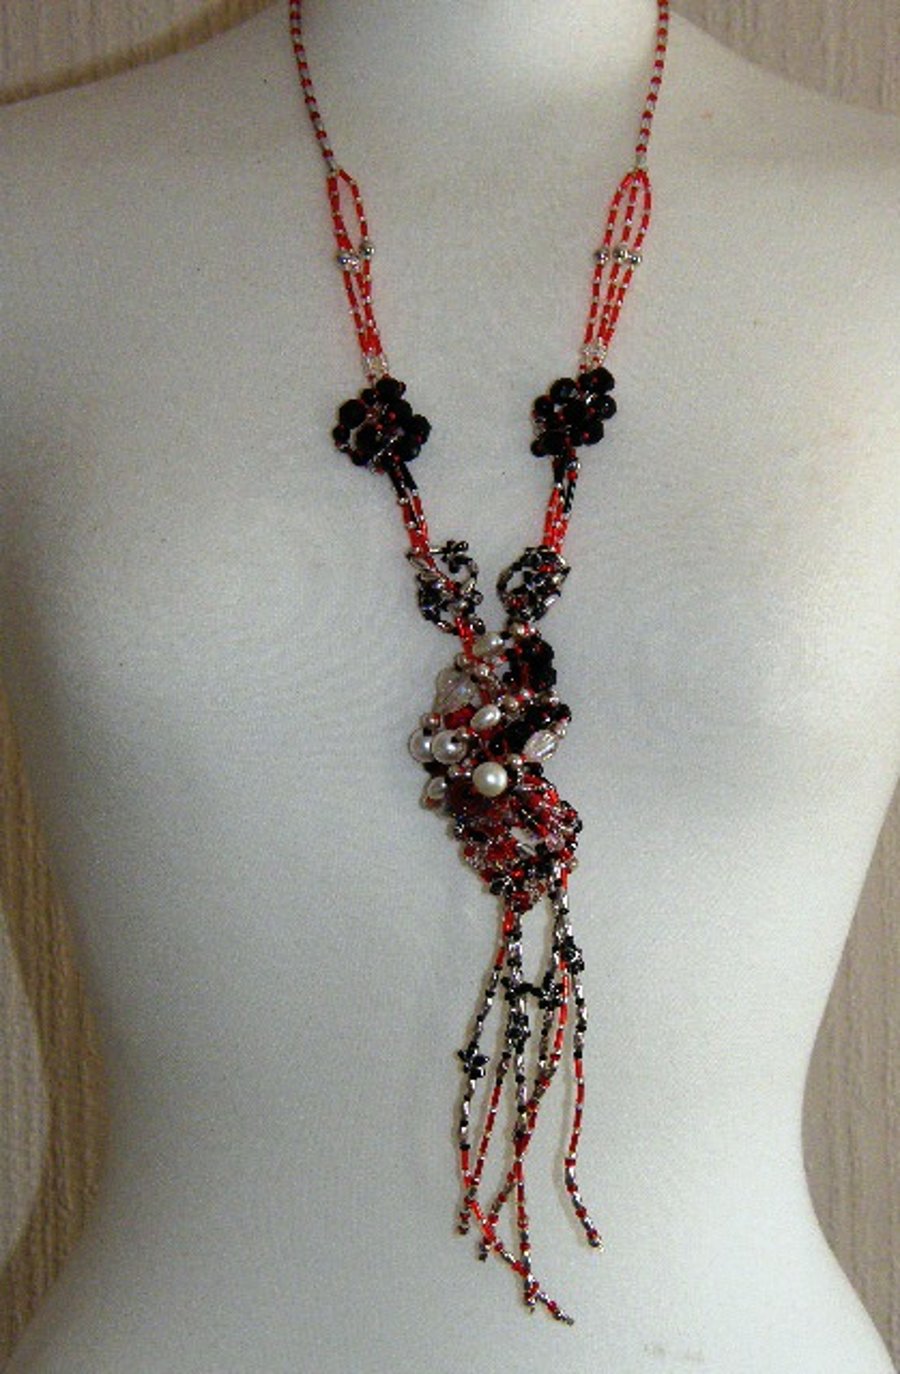 ON SALE 'Love Knot' Statement Necklace- Black Red Silver